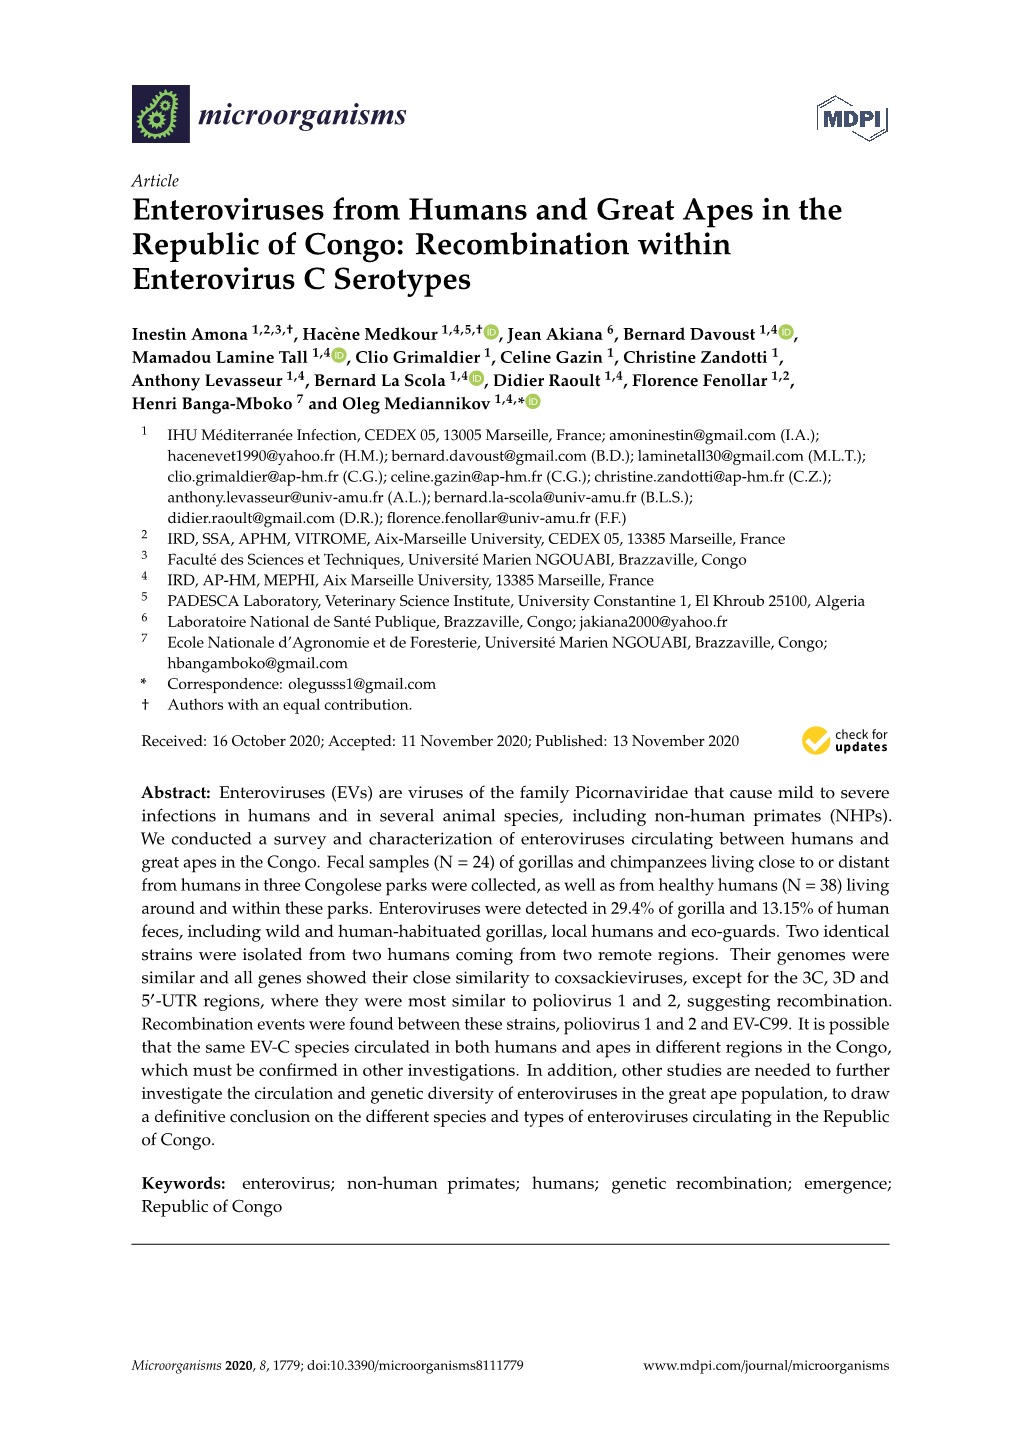 Enteroviruses from Humans and Great Apes in the Republic of Congo: Recombination Within Enterovirus C Serotypes